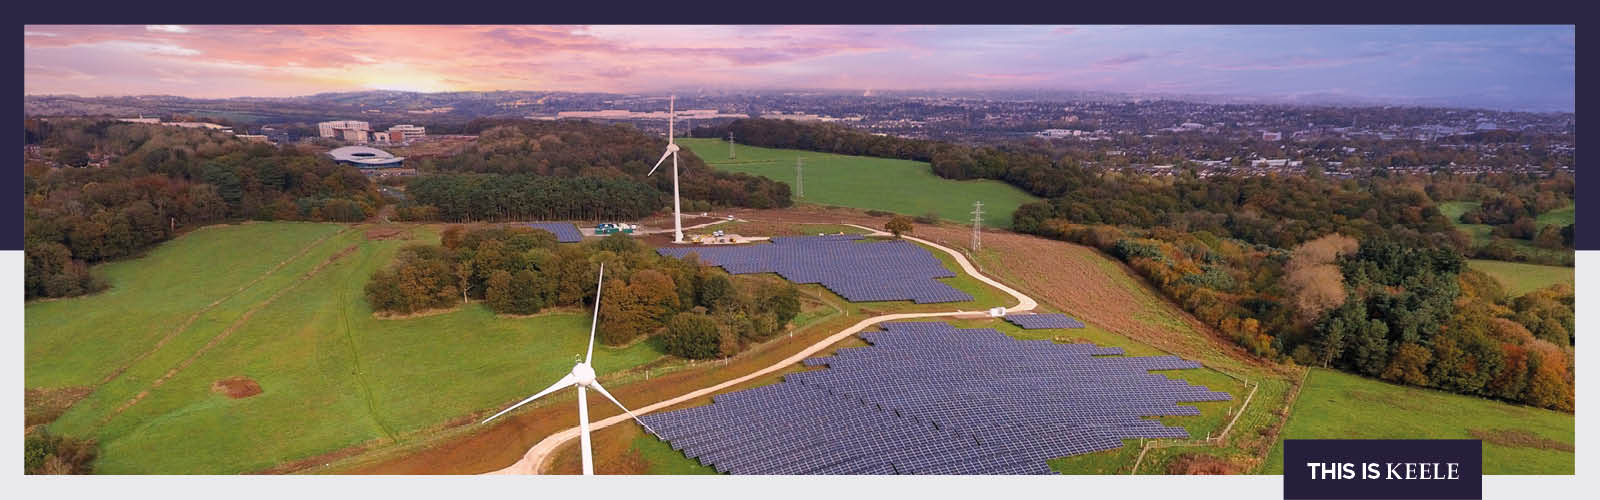 Drone photo of the Low Carbon Energy Generation Park during sunset, showing a field of solar panels and two wind turbines, at Keele University